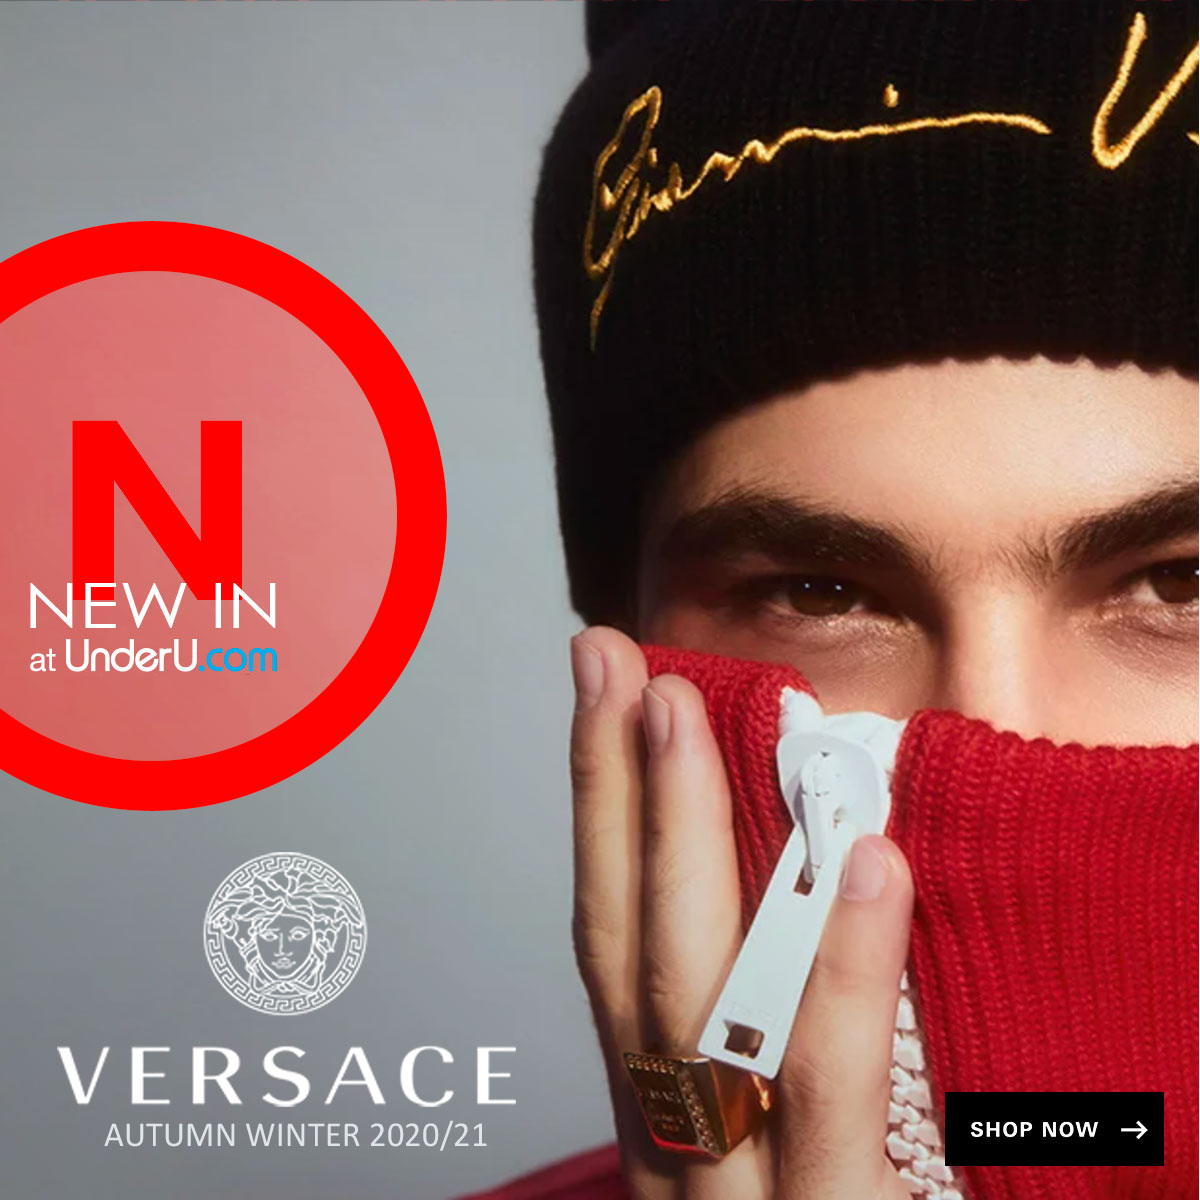 New-in VERSACE Autumn Winter ''20 Collection